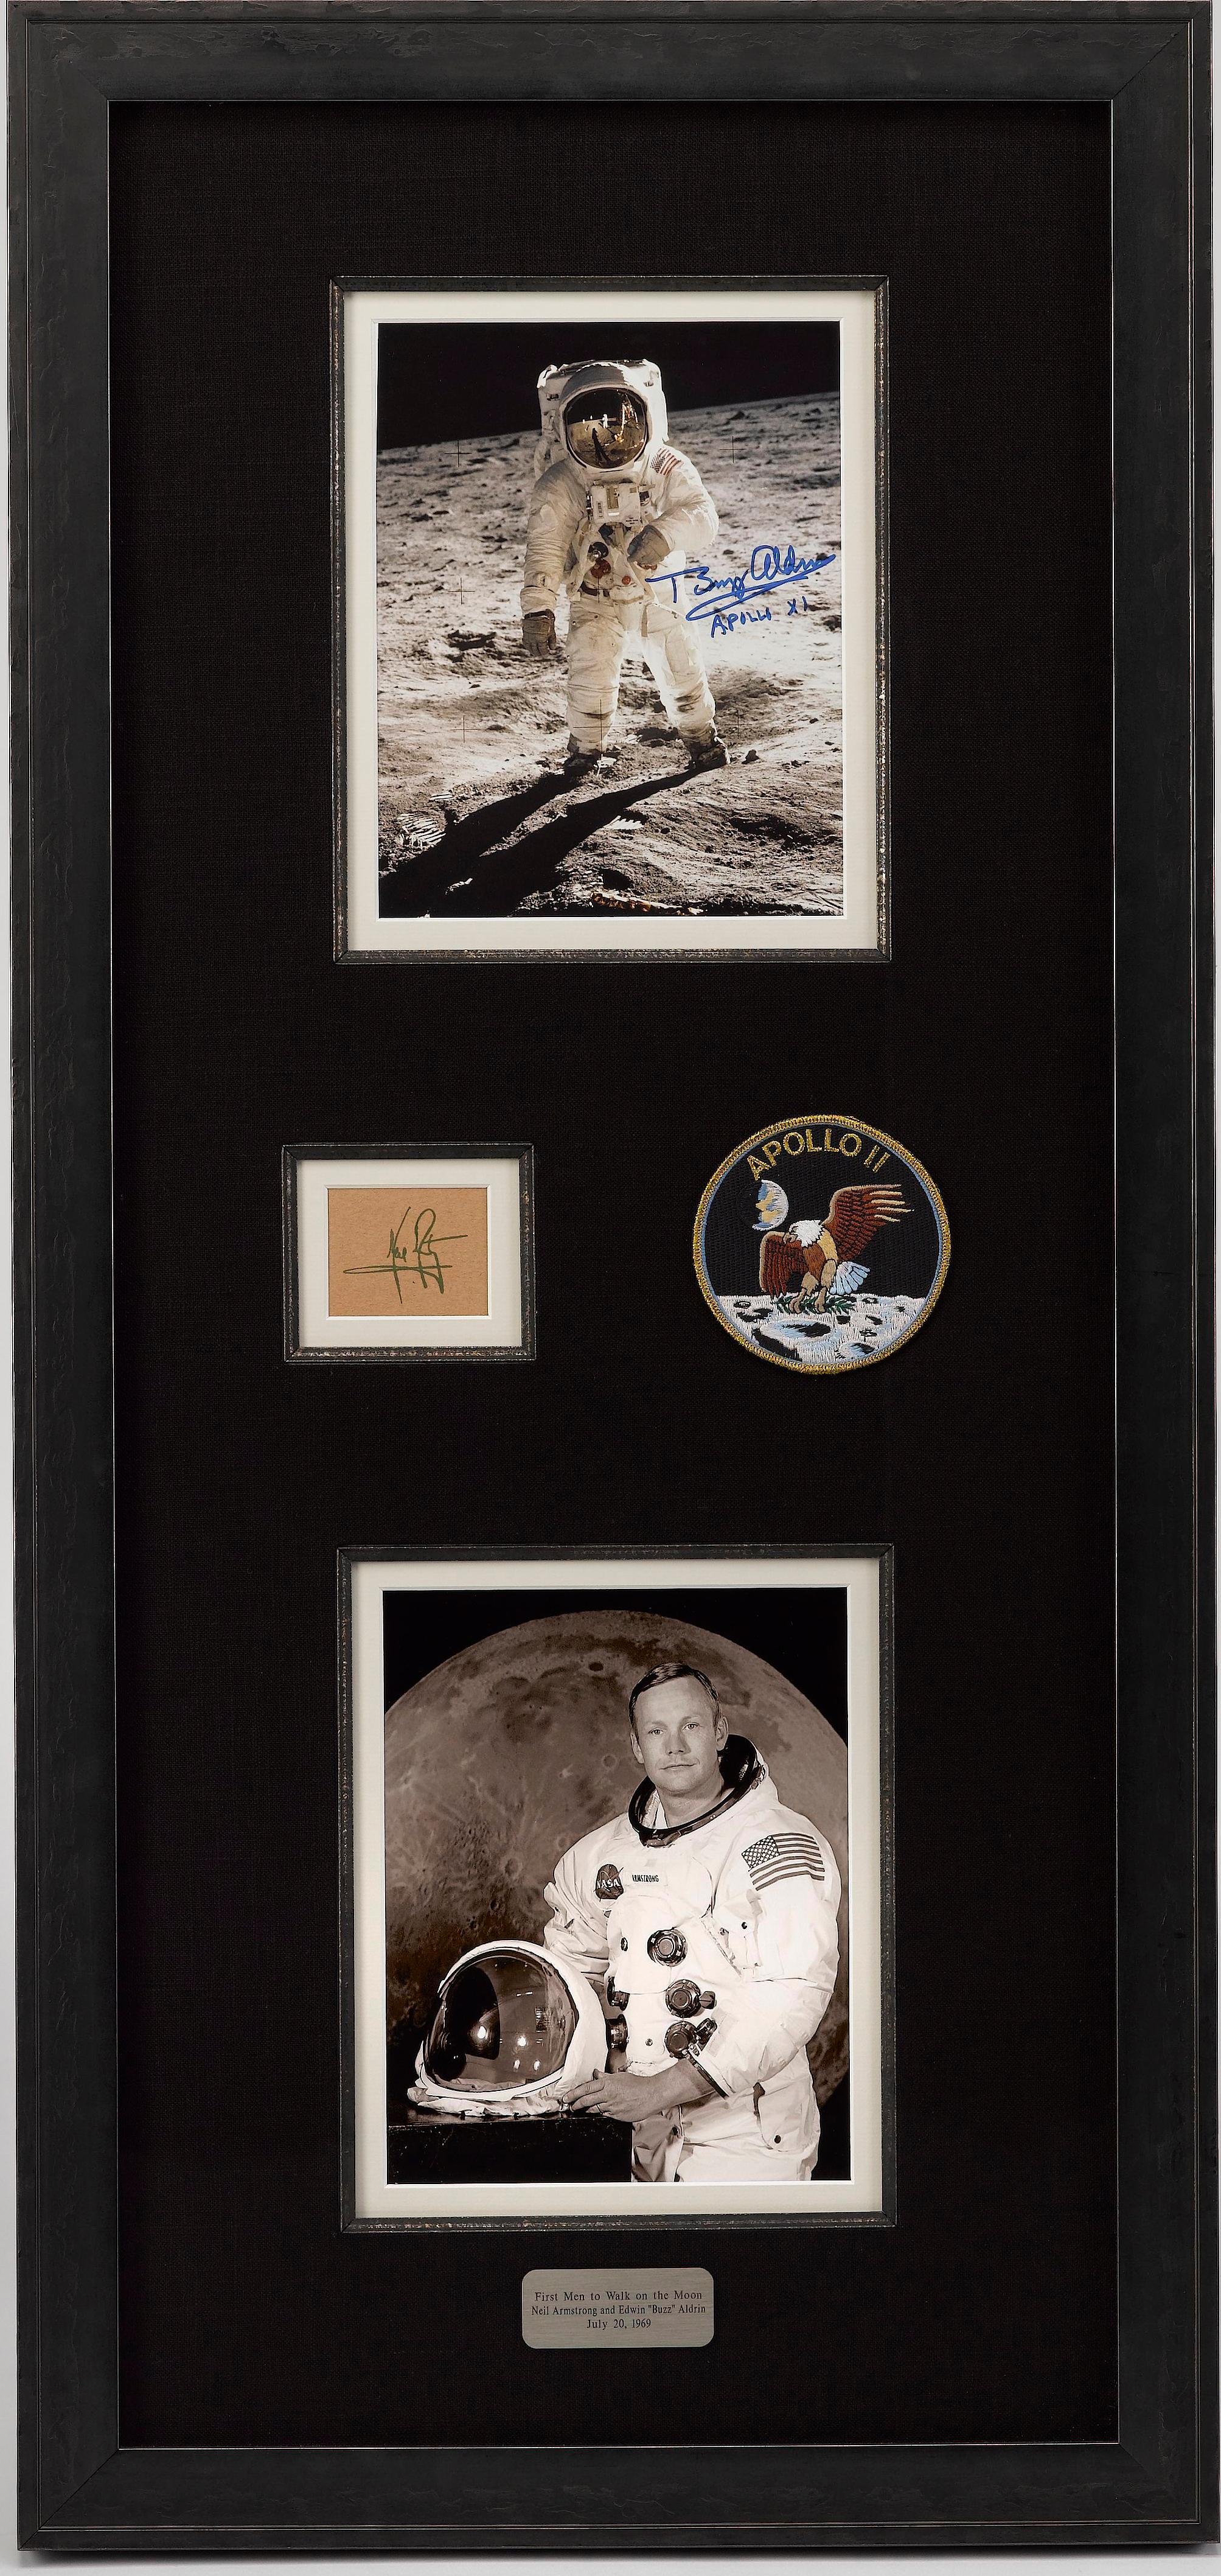 Presented is an exclusive Apollo 11 Signature Collage. The celebratory and collectible collage is composed of a Sea of Tranquility photograph signed by astronaut Buzz Aldrin, a signed Neil Armstrong cut signature, and a Apollo 11 mission patch.

In